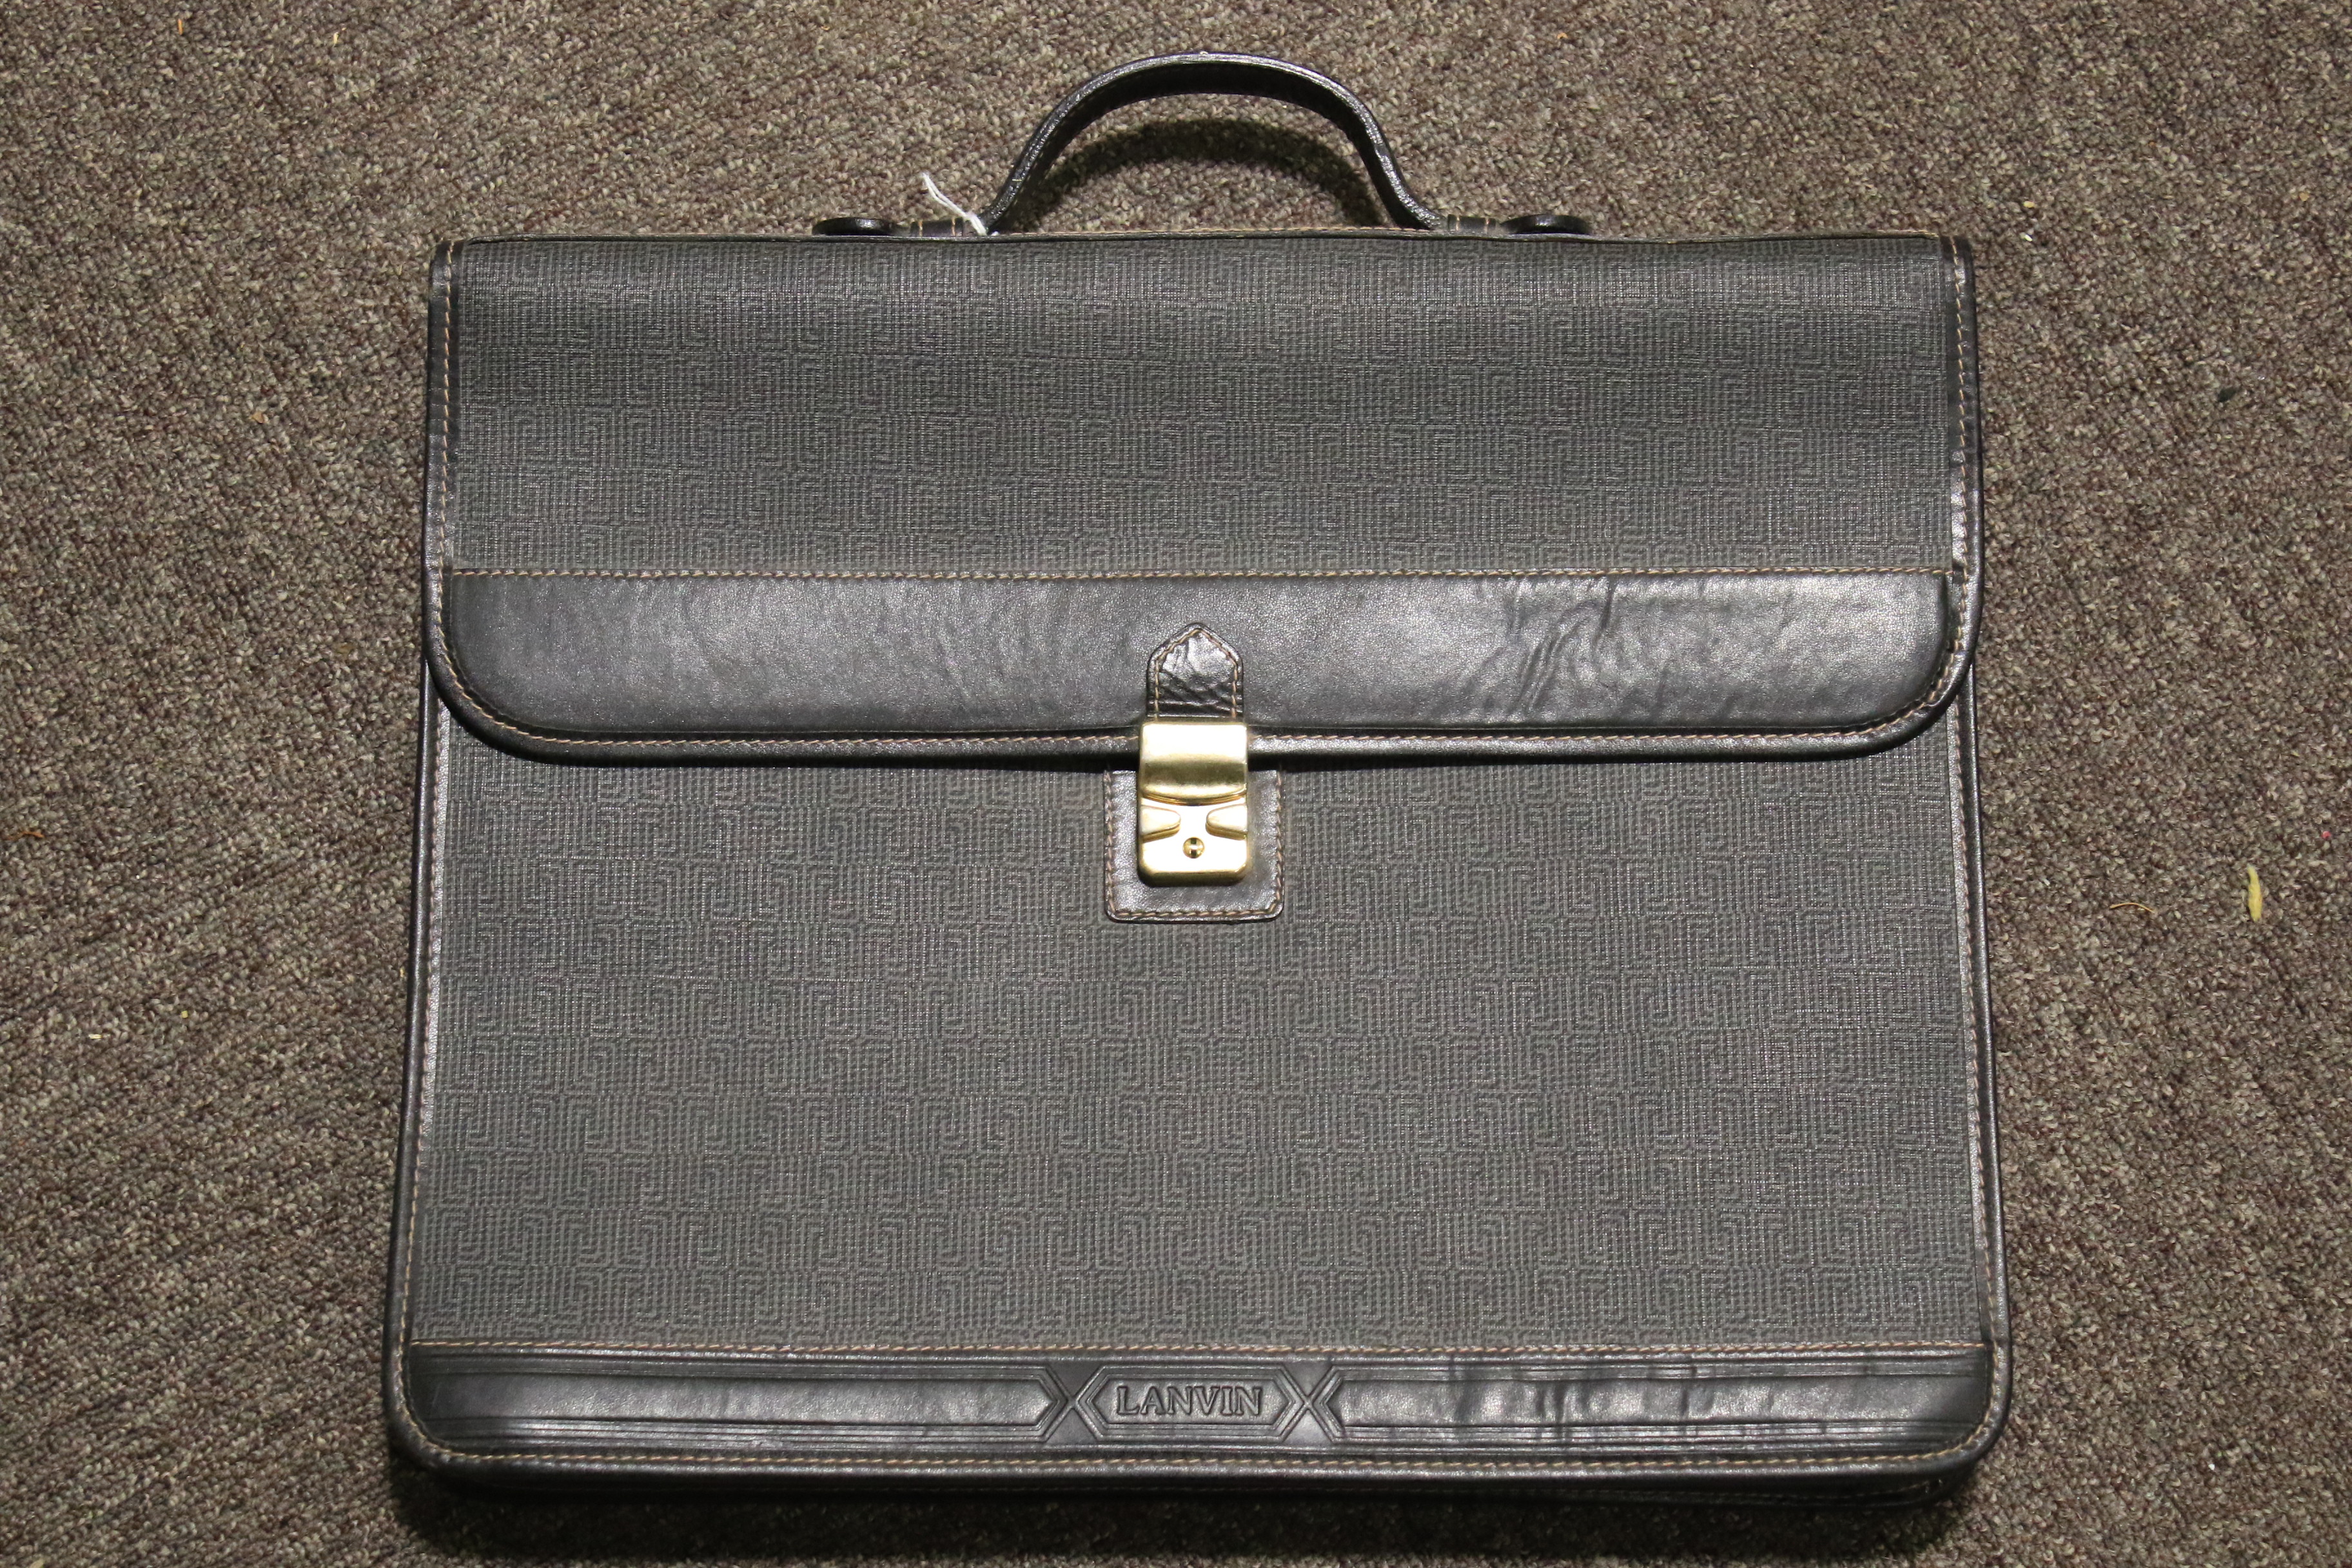 A Lanvin black leather satchel and a vintage ladies Widegate leather purse. - Image 6 of 16